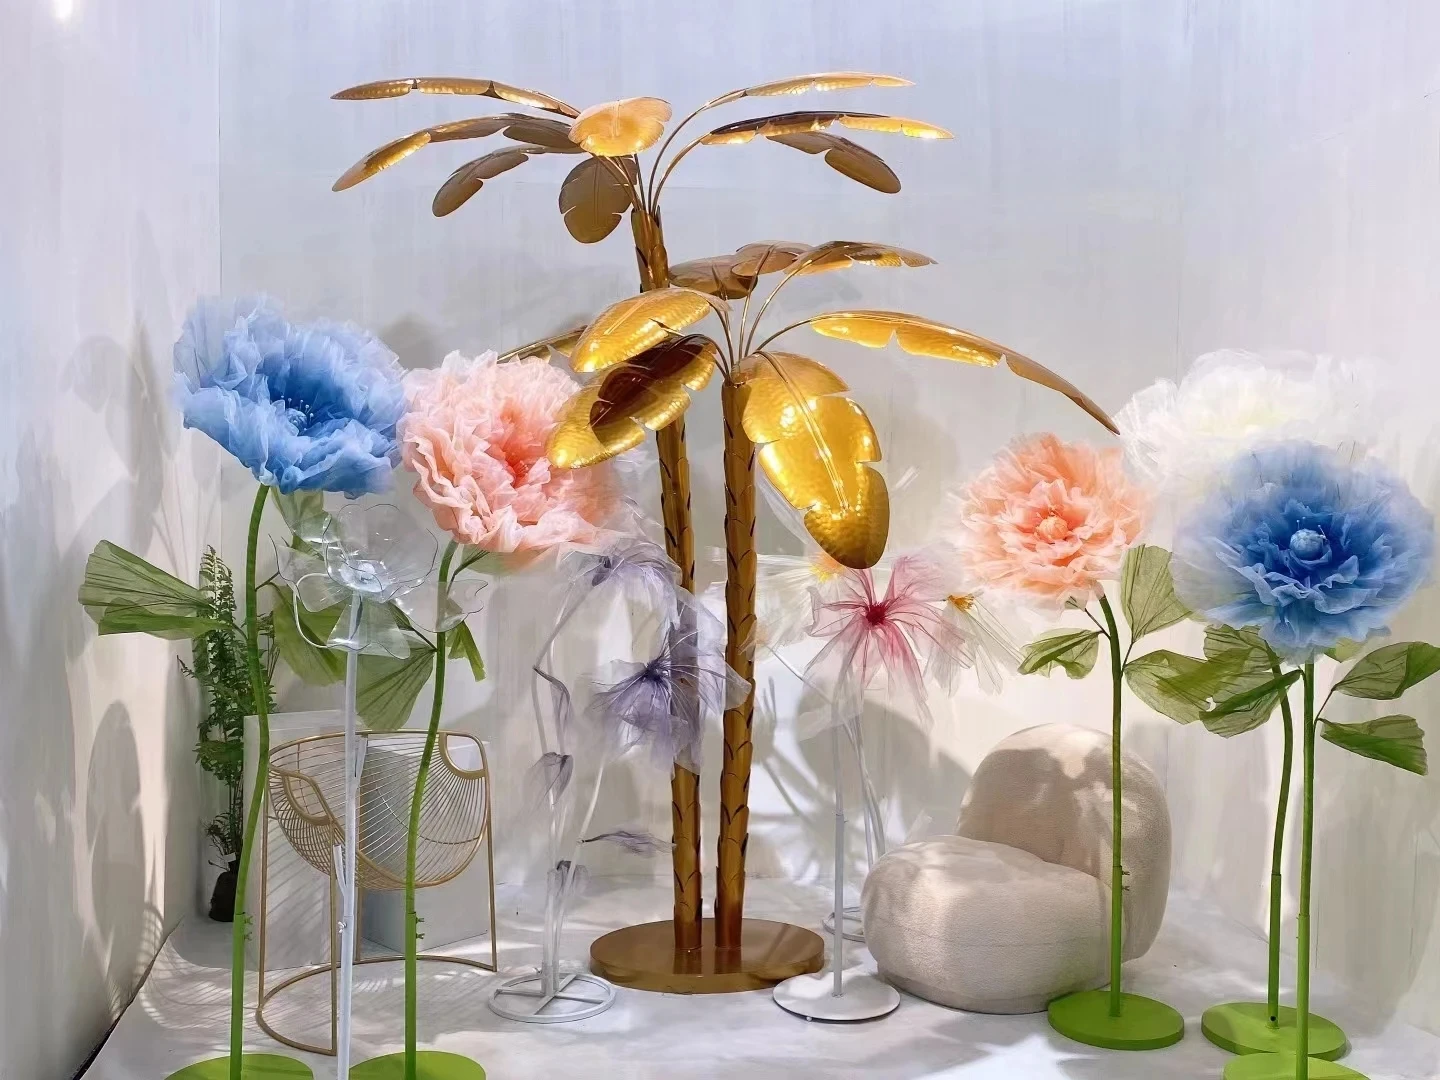 

Artificial Silk Flowers for Home Decor, Automatic Opening and Closing, Mechanical Flower Simulation, Christmas Party, Wedding De